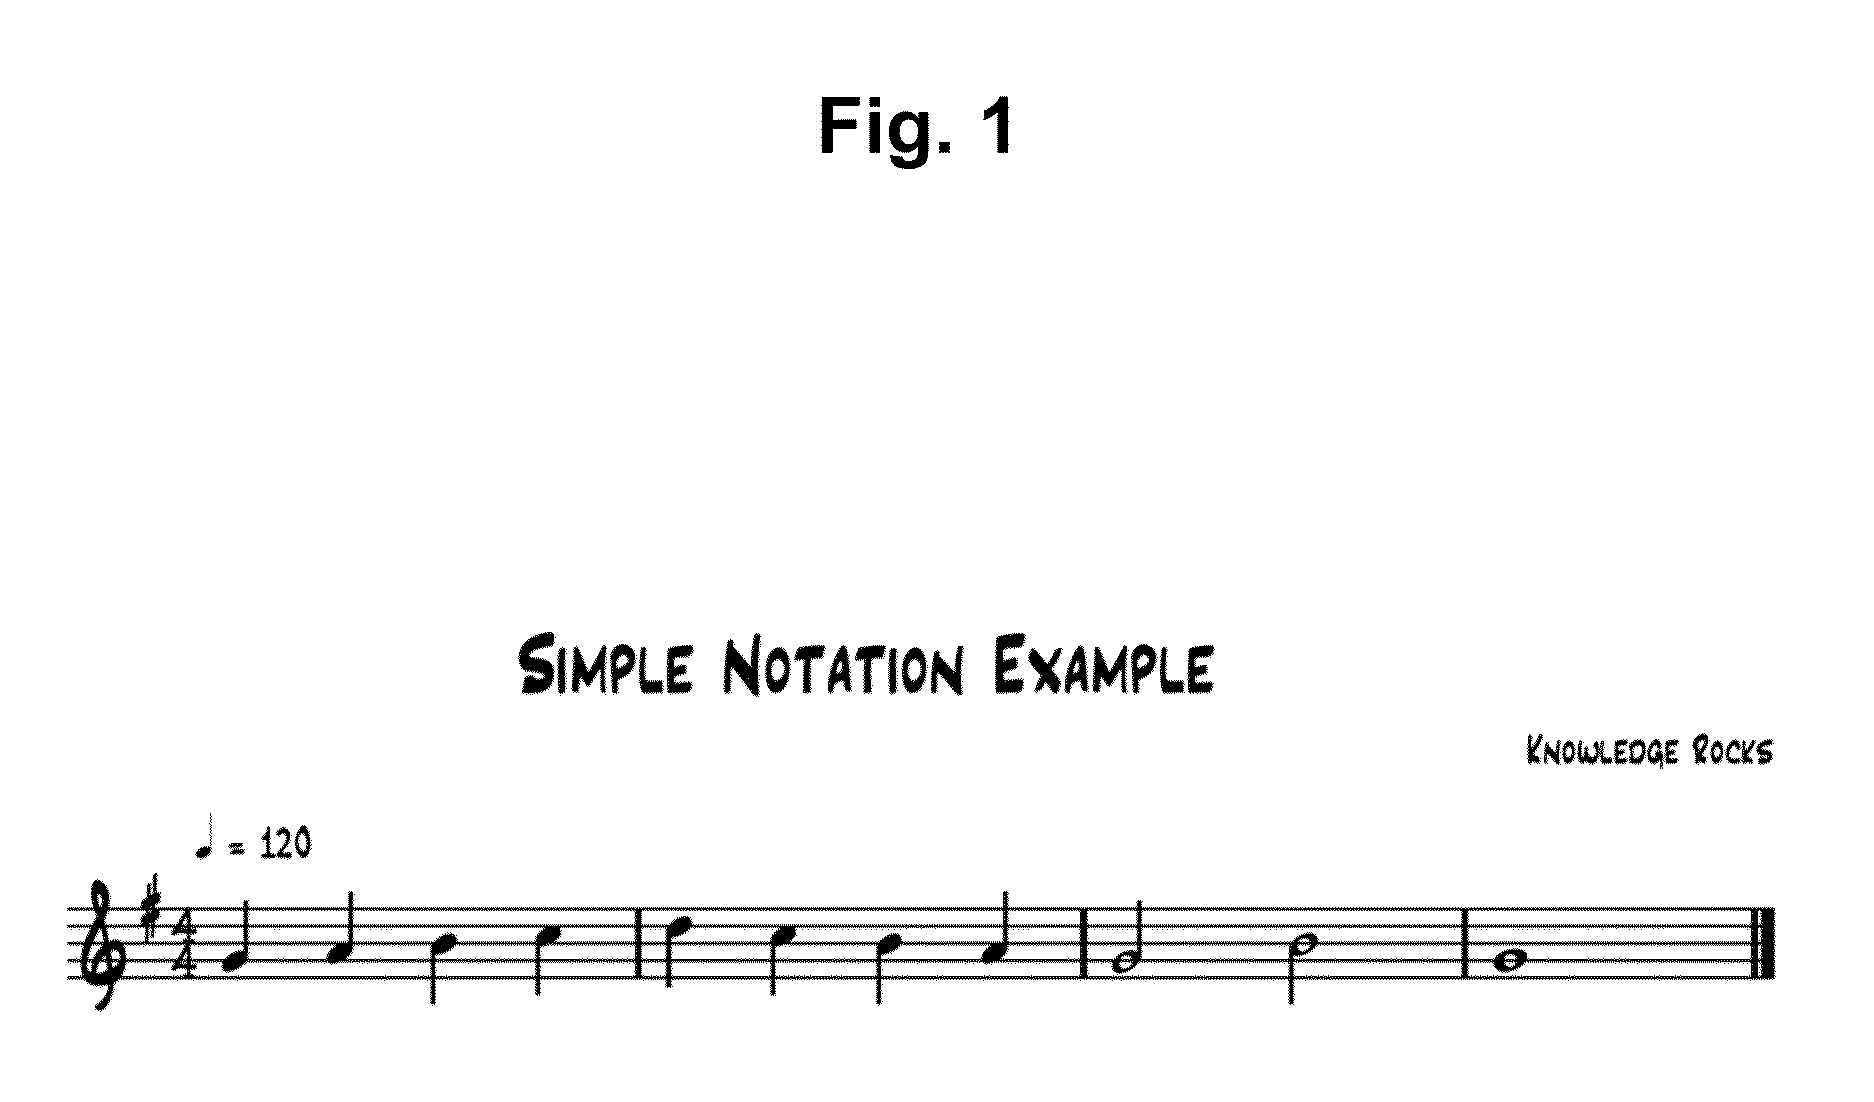 Automatic positioning of music notation